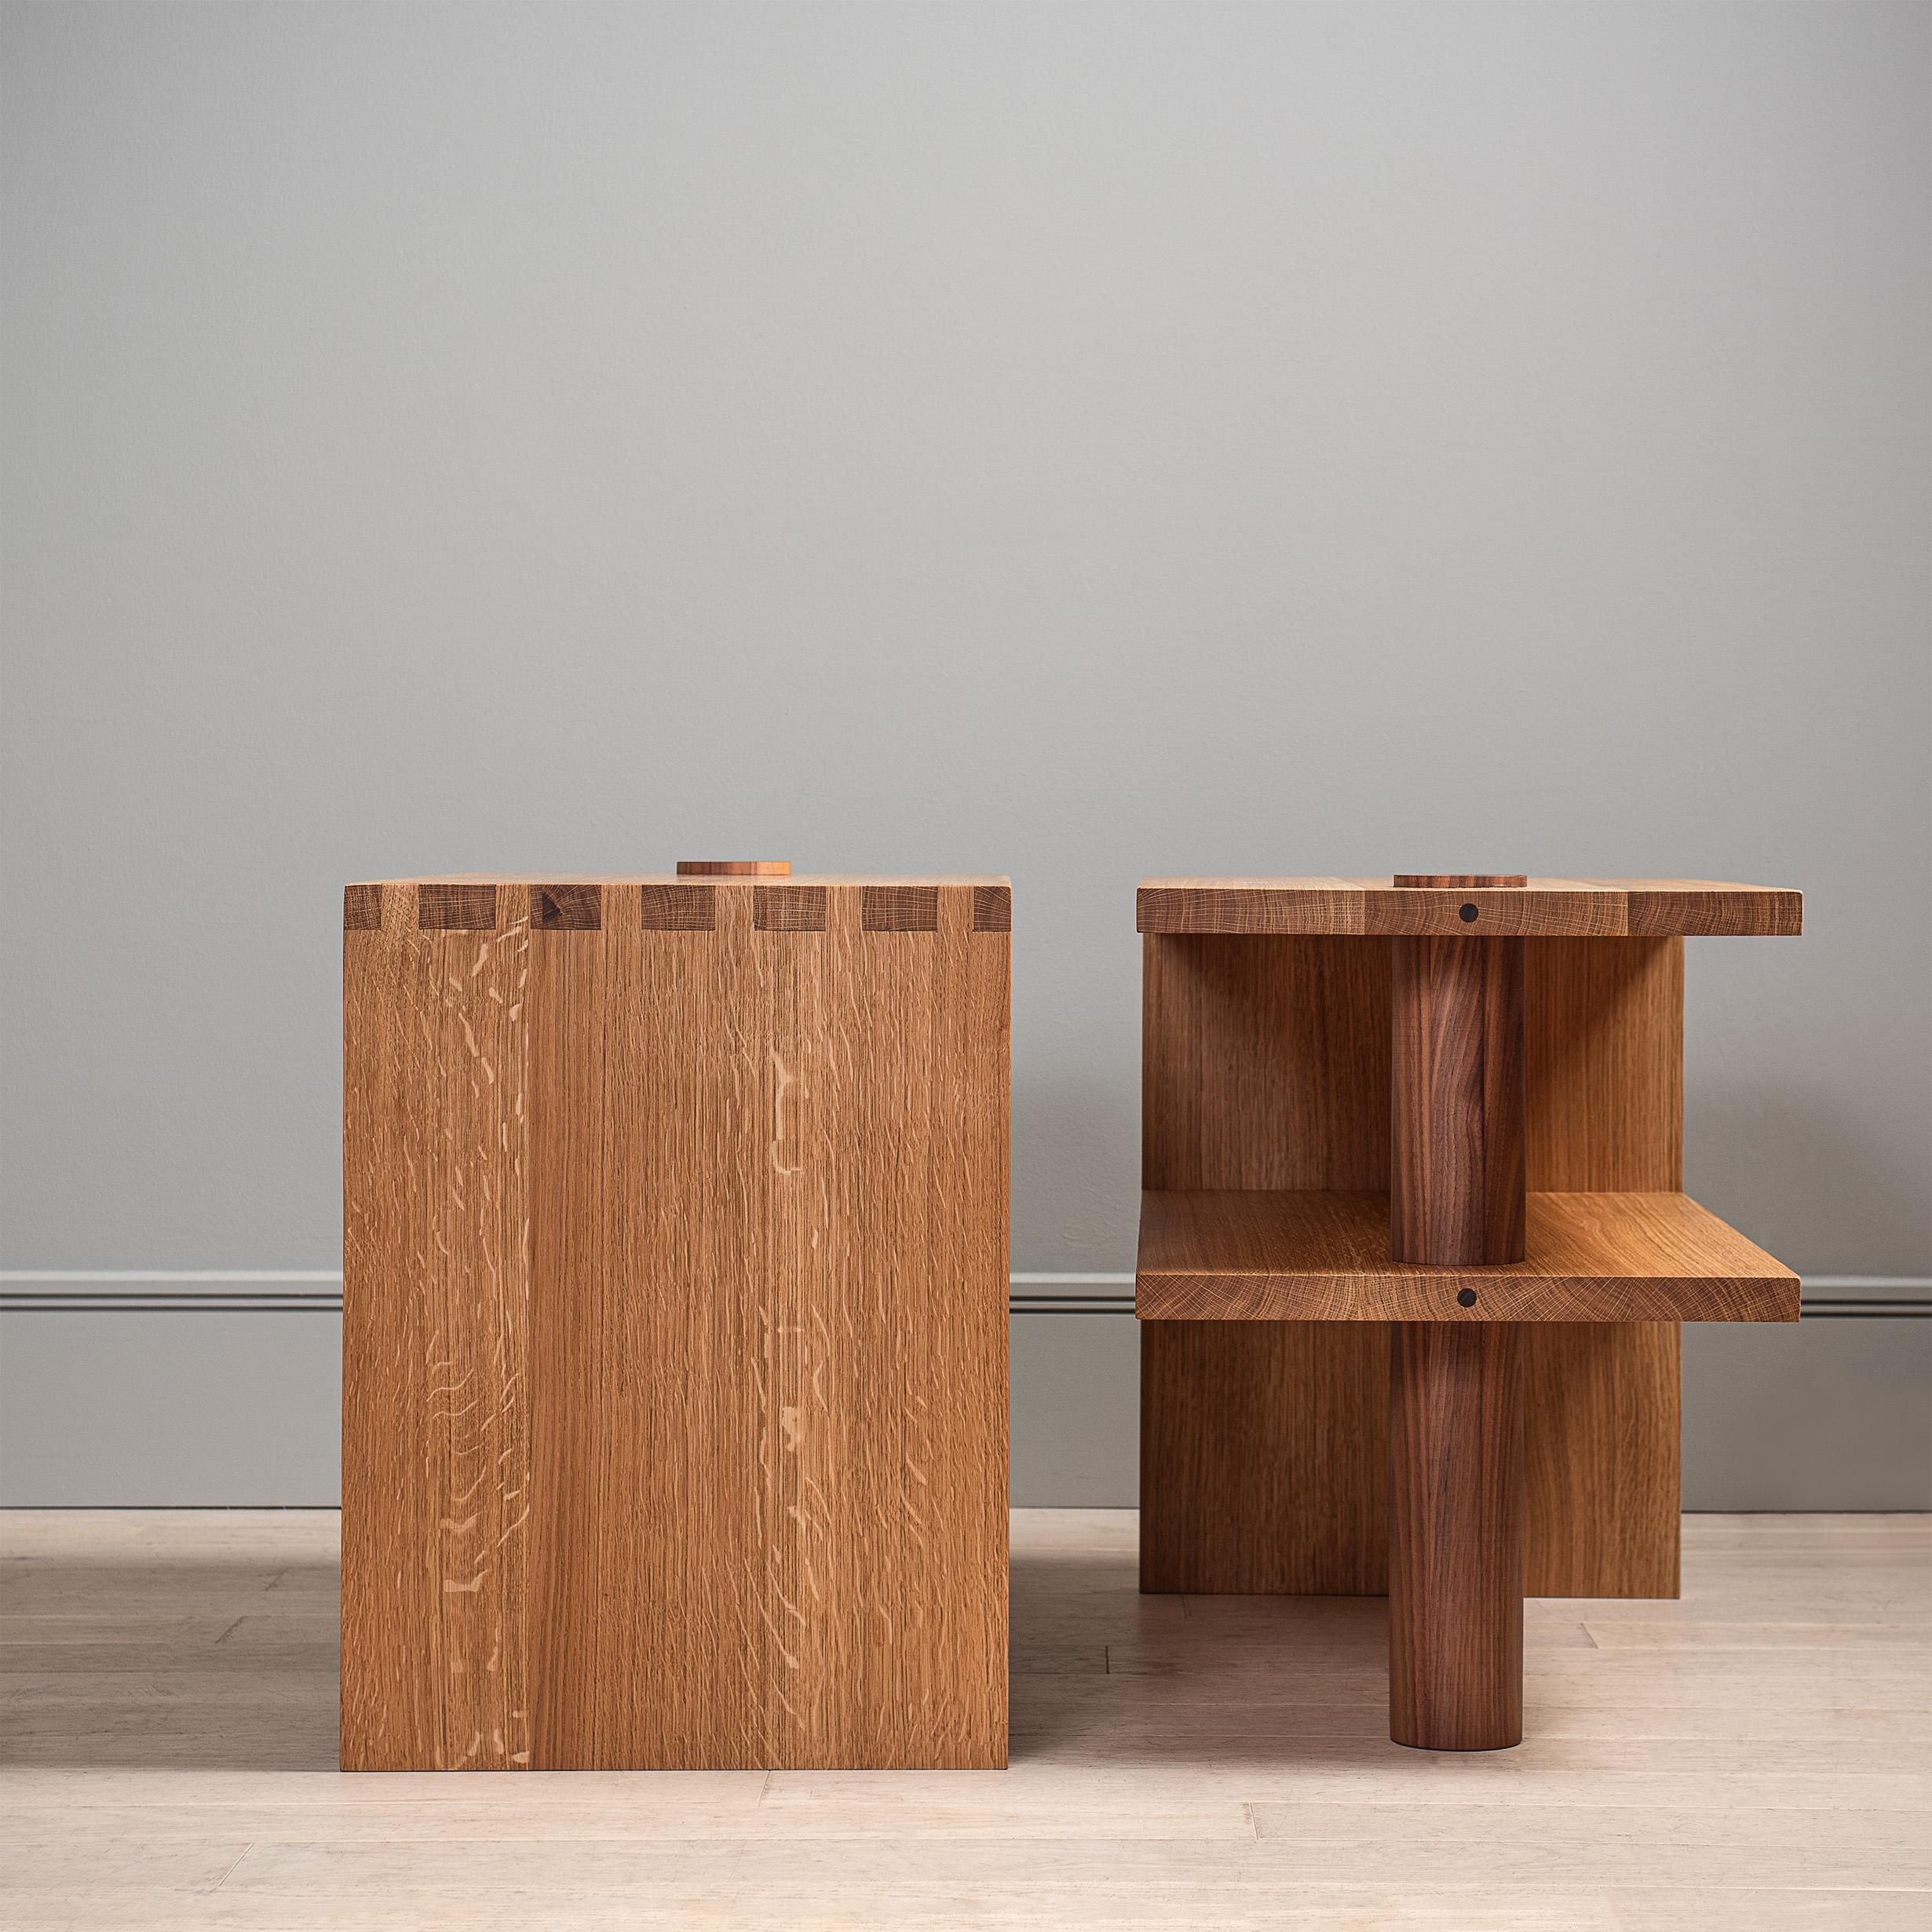 An alternative monumental version of our architectural Post-Modern oak & walnut pillar end tables or nightstands. Designed and handcrafted in England using traditional furniture and cabinetry techniques from fully quarter-sawn English Oak and